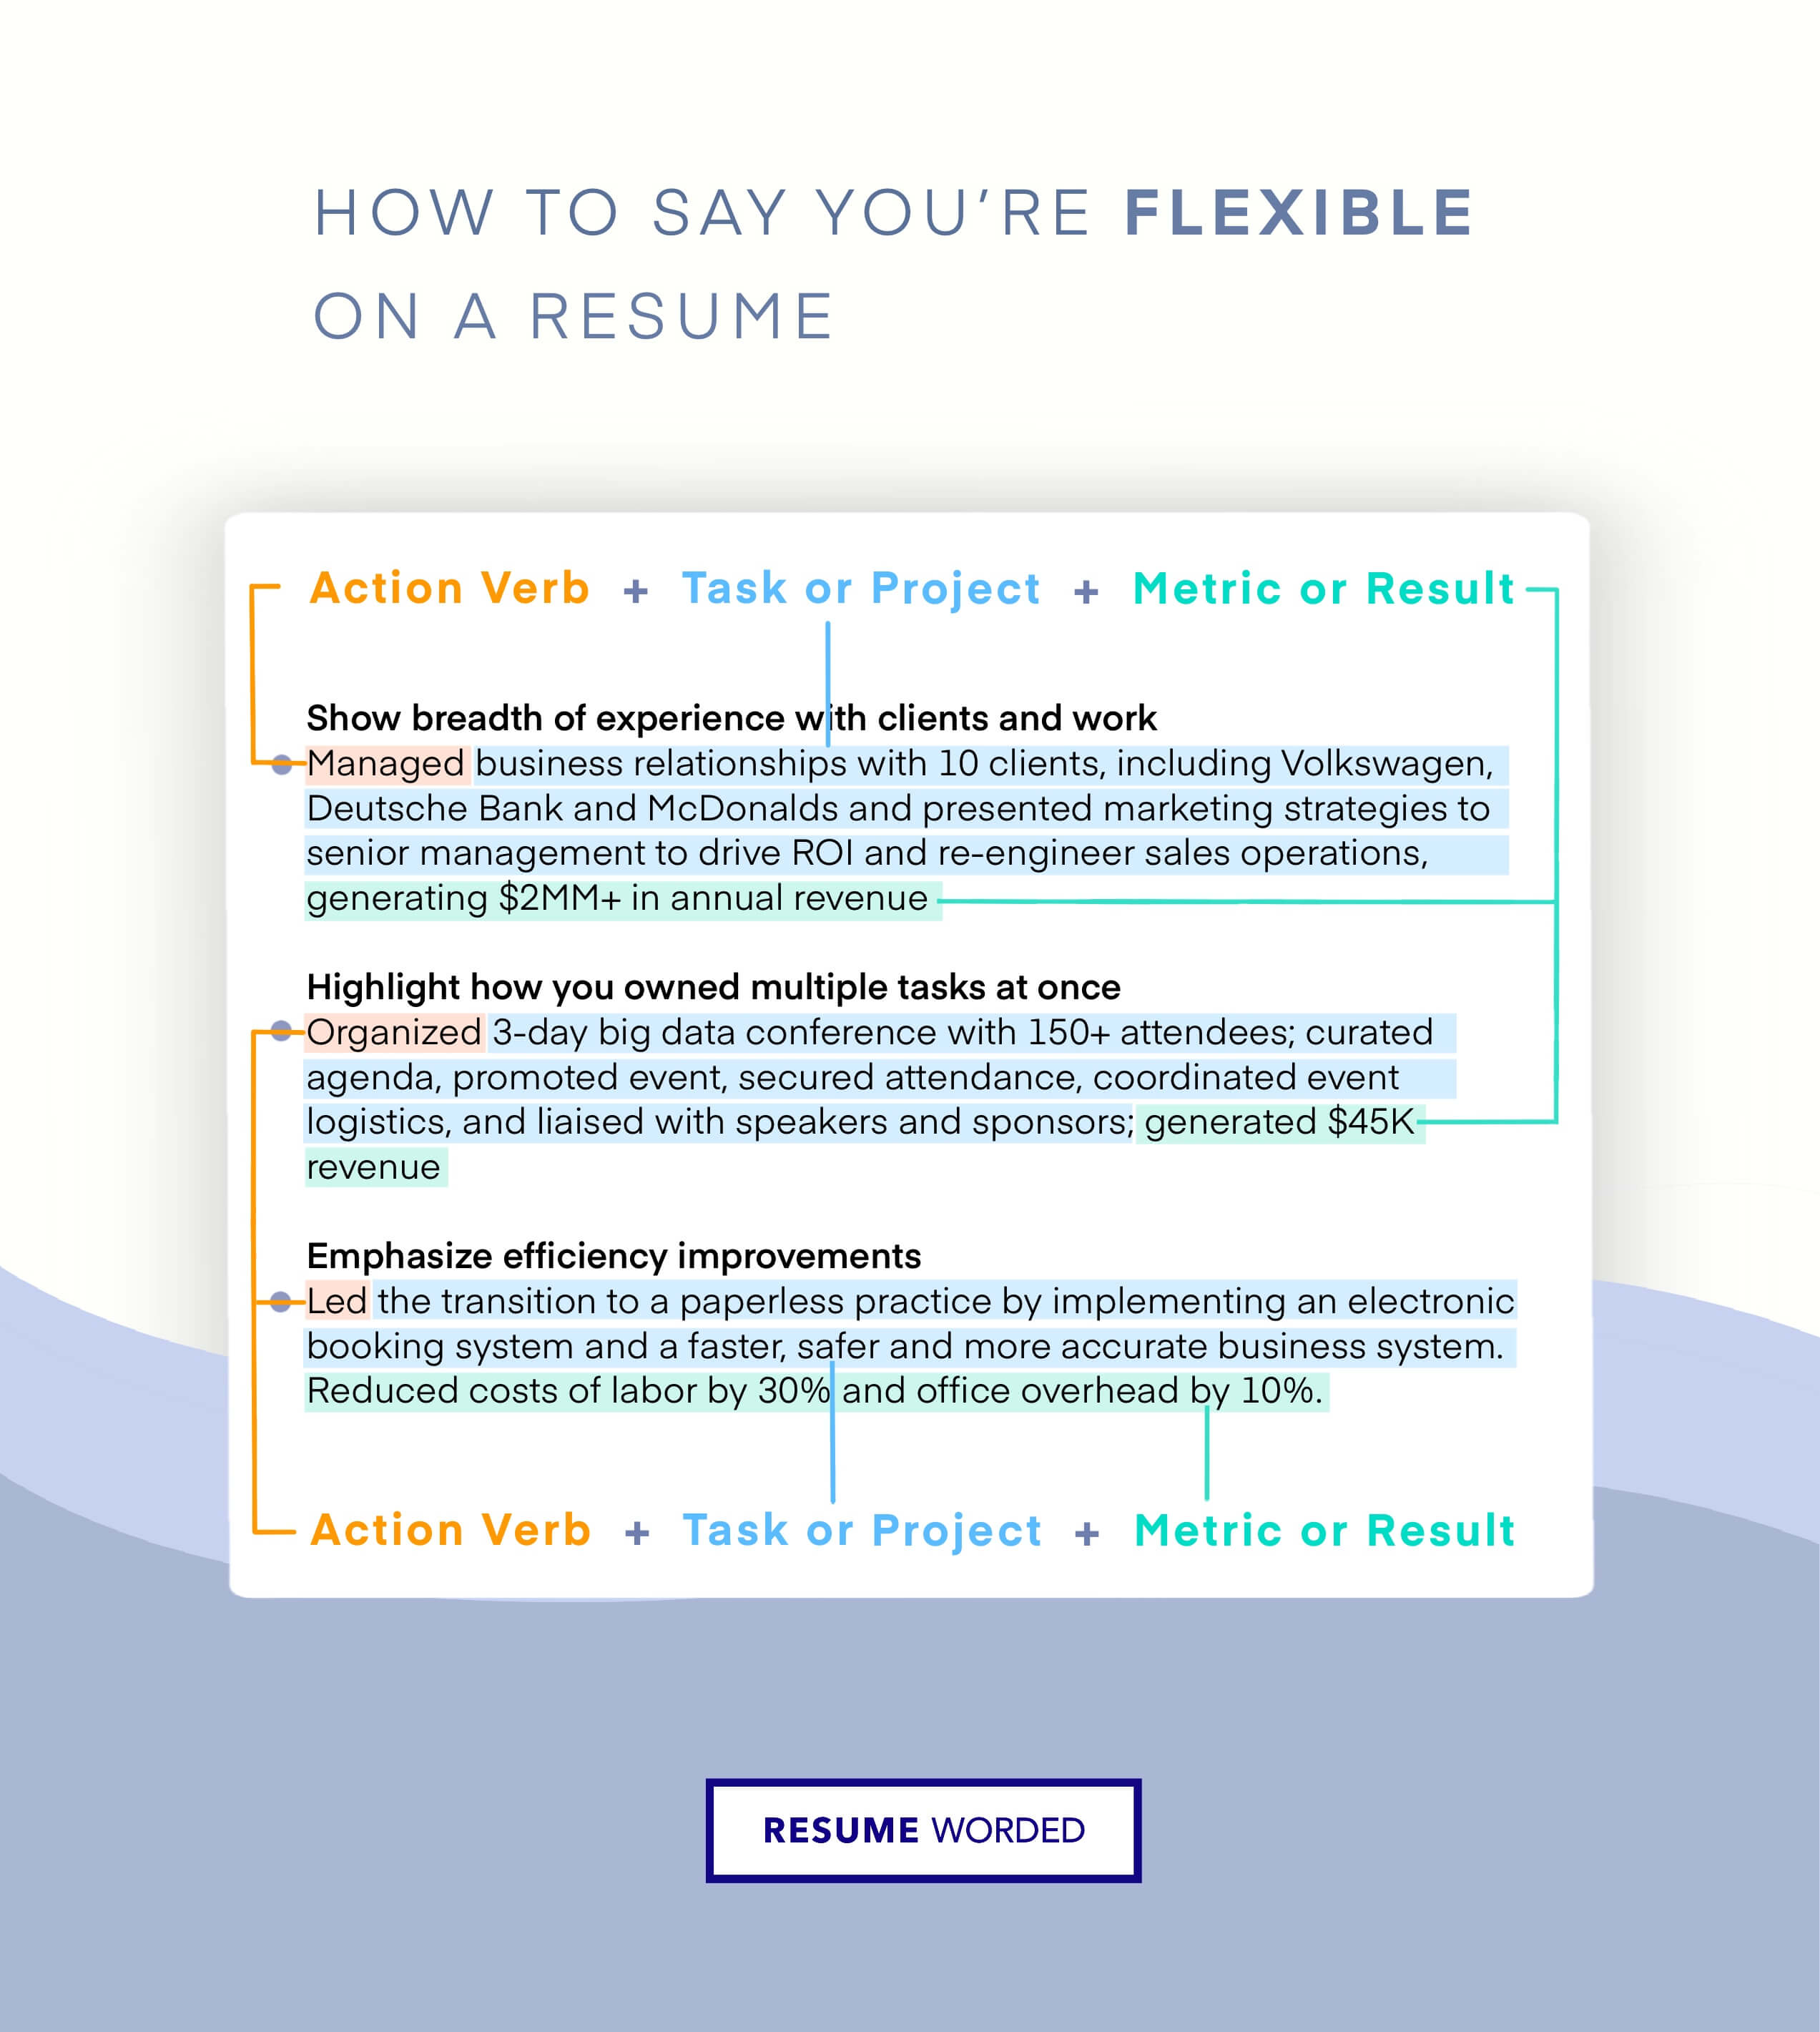 Showcase your adaptability through projects - Agile Business Analyst Resume